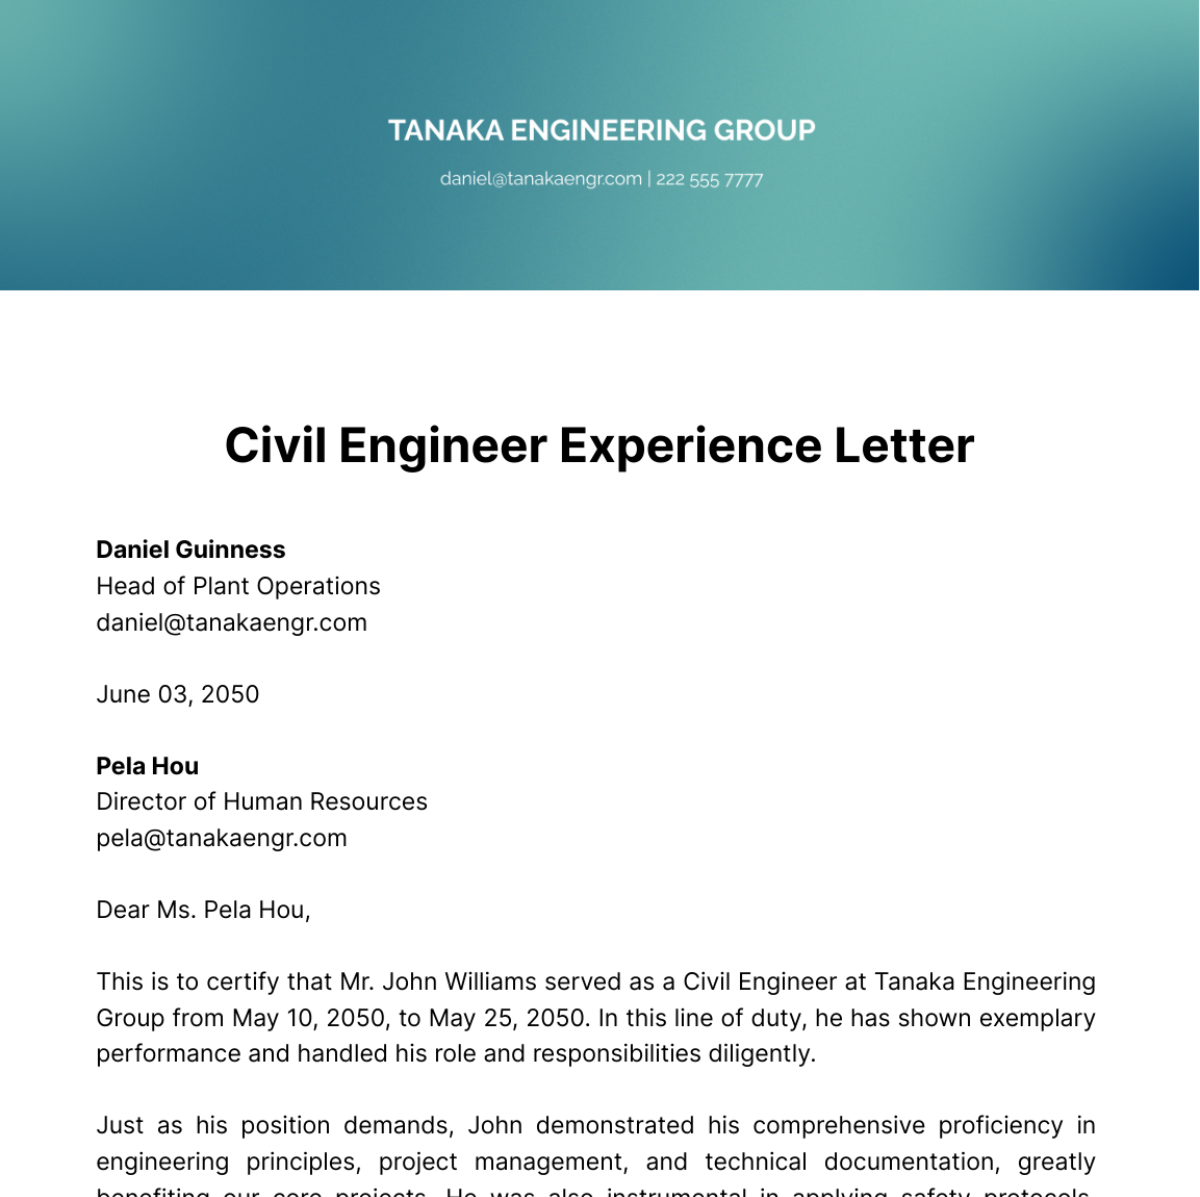 Civil Engineer Experience Letter   Template